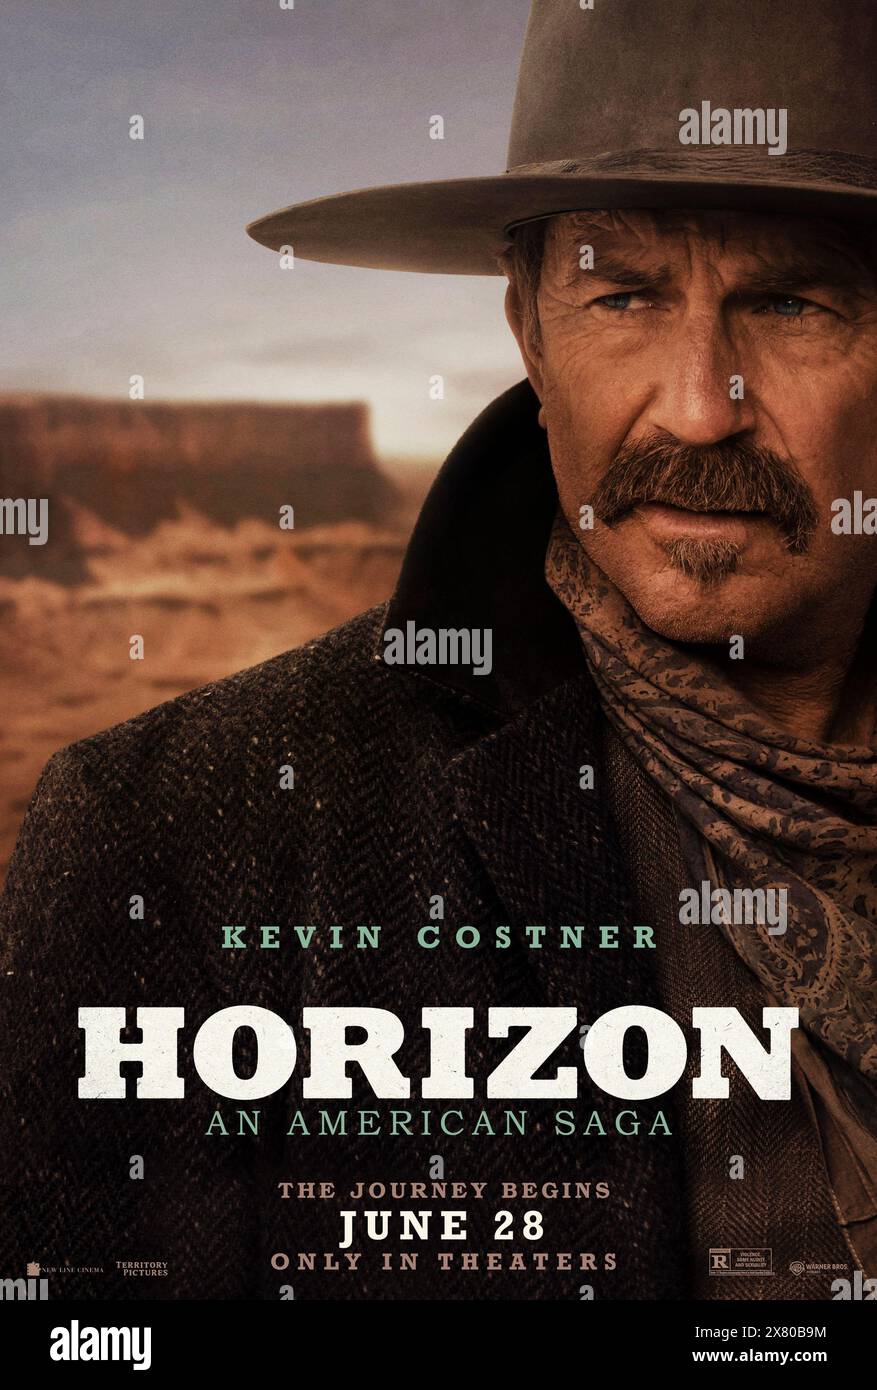 Horizon: An American Saga - Chapter 1 (2024) directed by Kevin Costner and starring Kevin Costner, Abbey Lee and Sienna Miller. Chronicles a multi-faceted, 15-year span of pre-and post-Civil War expansion and settlement of the American west. US one sheet poster.***EDITORIAL USE ONLY*** Credit: BFA / Warner Bros Stock Photo